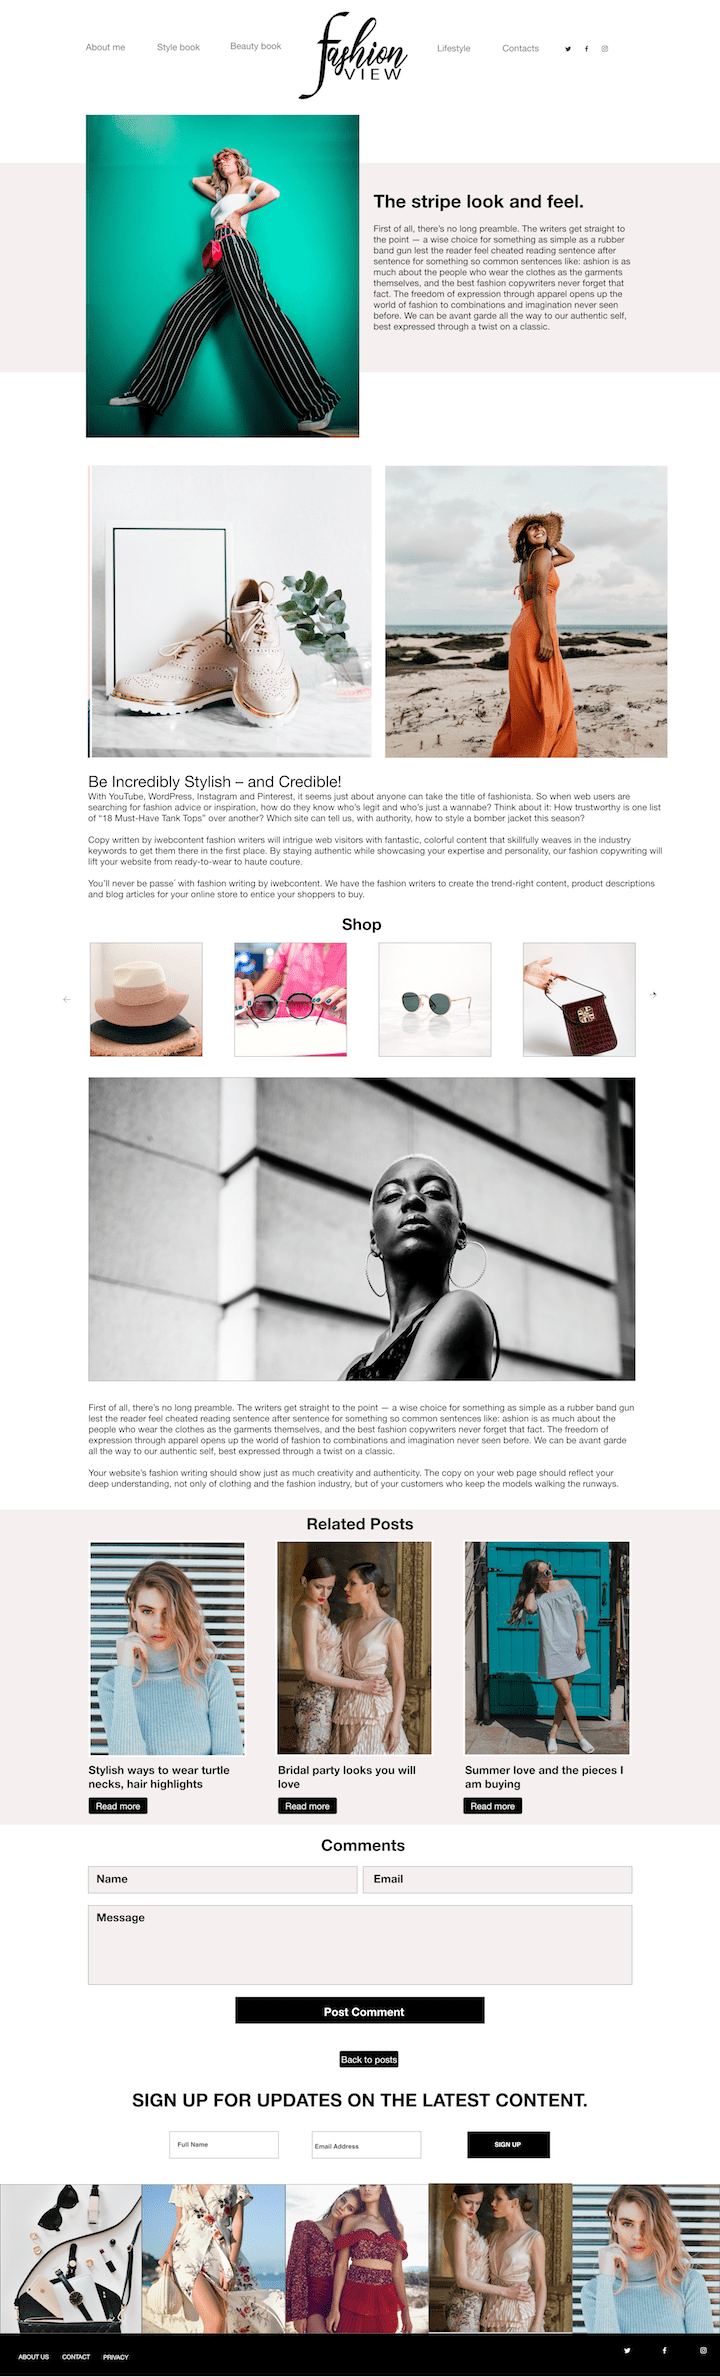 Homepage for fashion blogger website